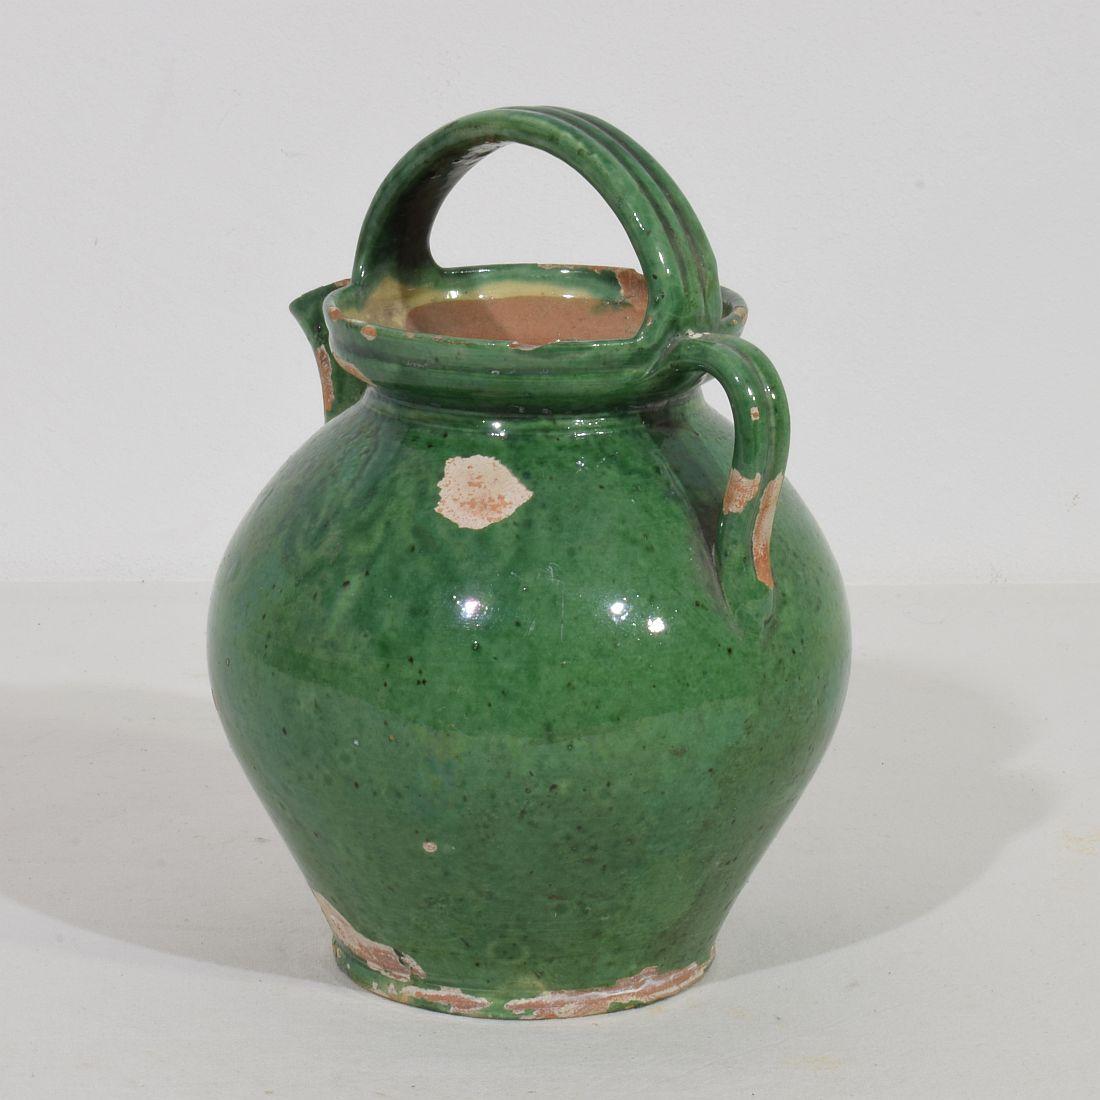 Lovely small  authentic and rare piece of pottery  from the Provence. Beautiful weathered and an amazing color. Imperfections help authenticate this water cruche as it was a utilitarian type piece, France, circa 1850.